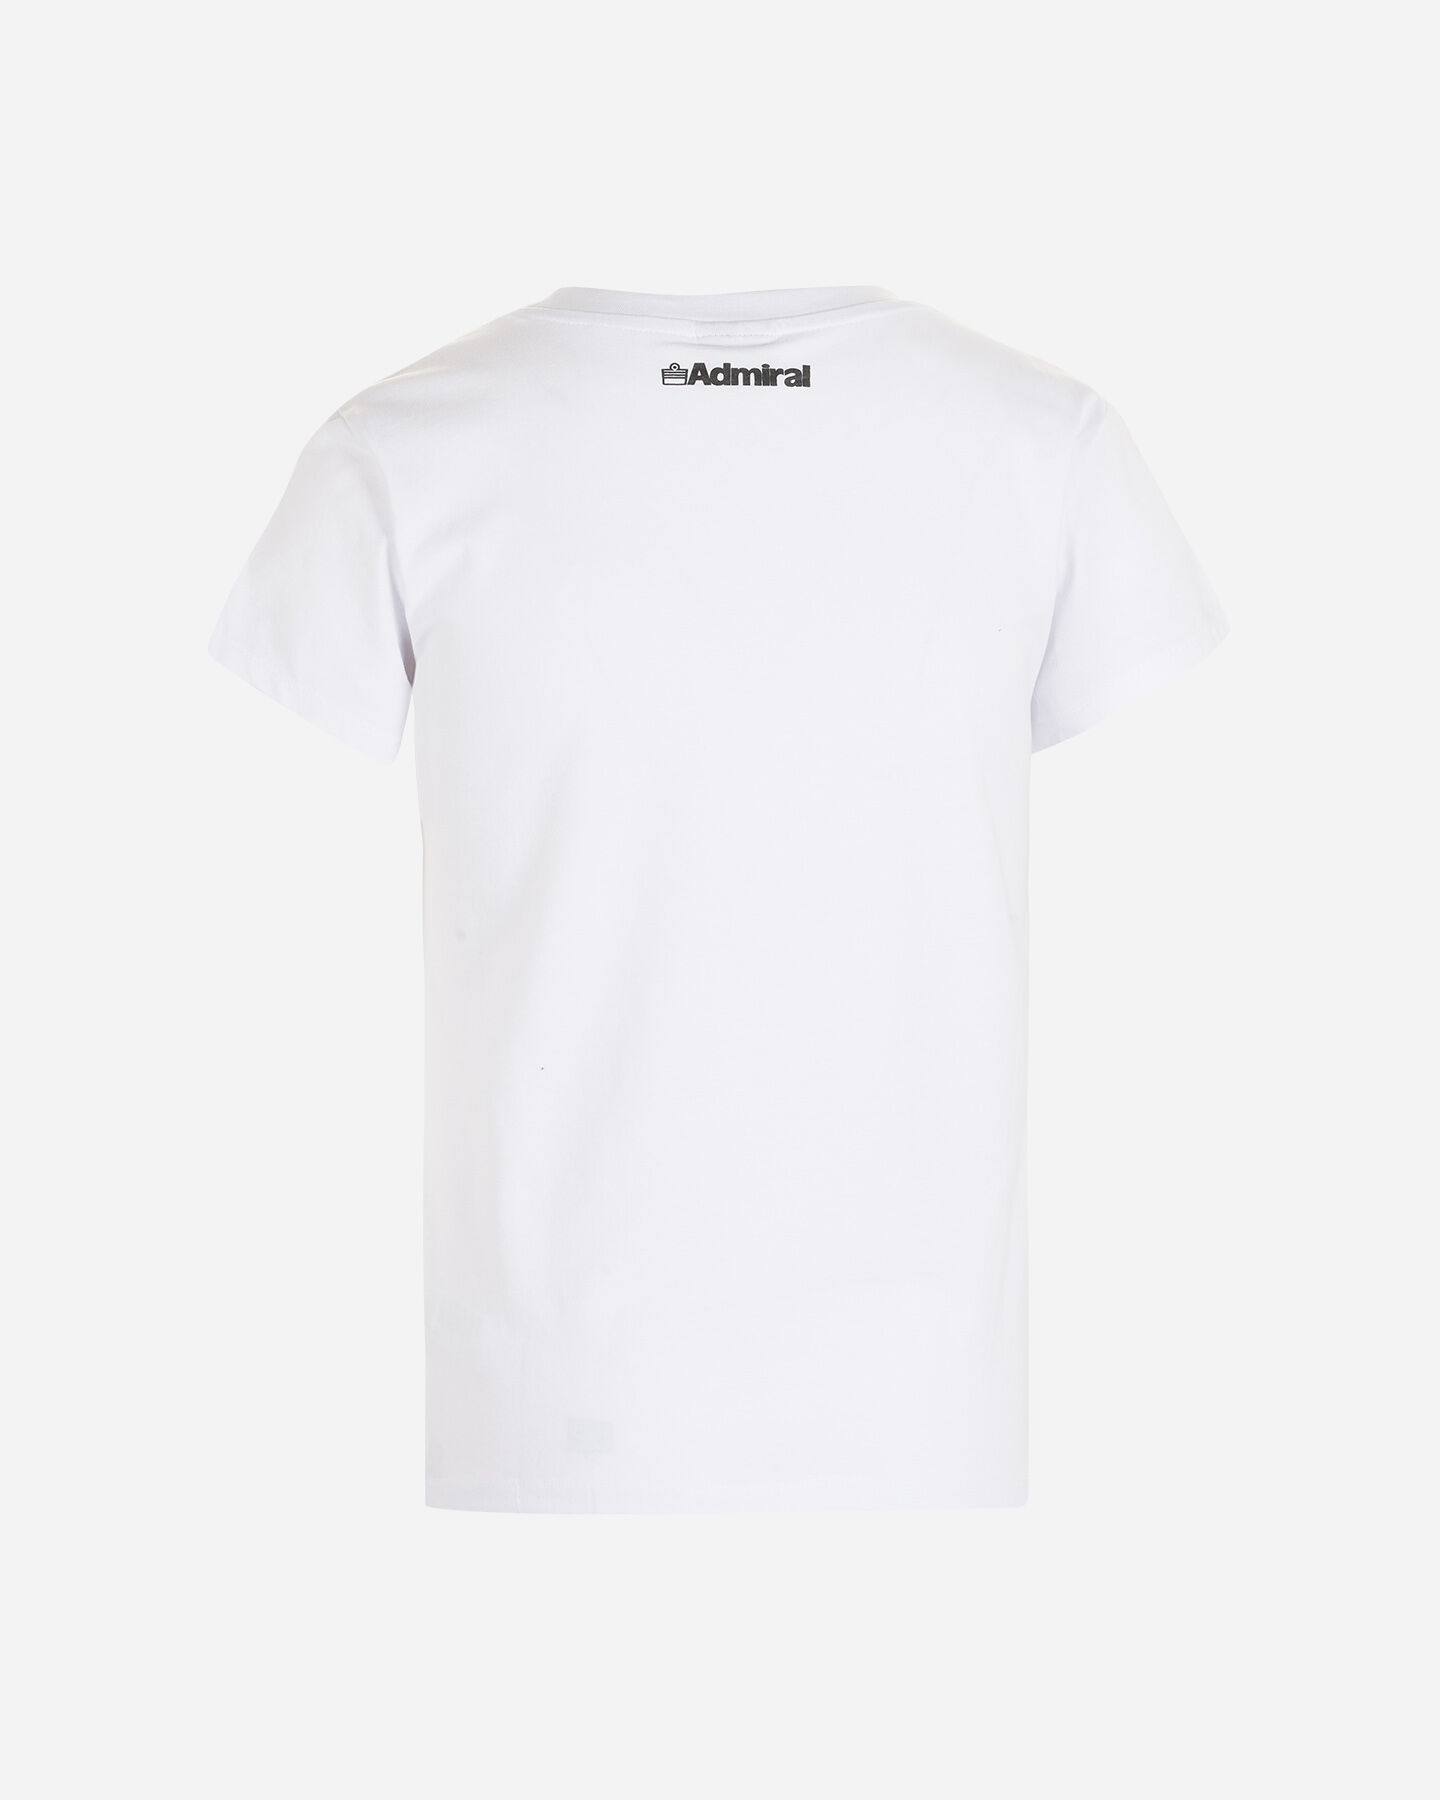  T-Shirt ADMIRAL BASIC SPORT W S4101704 scatto 1